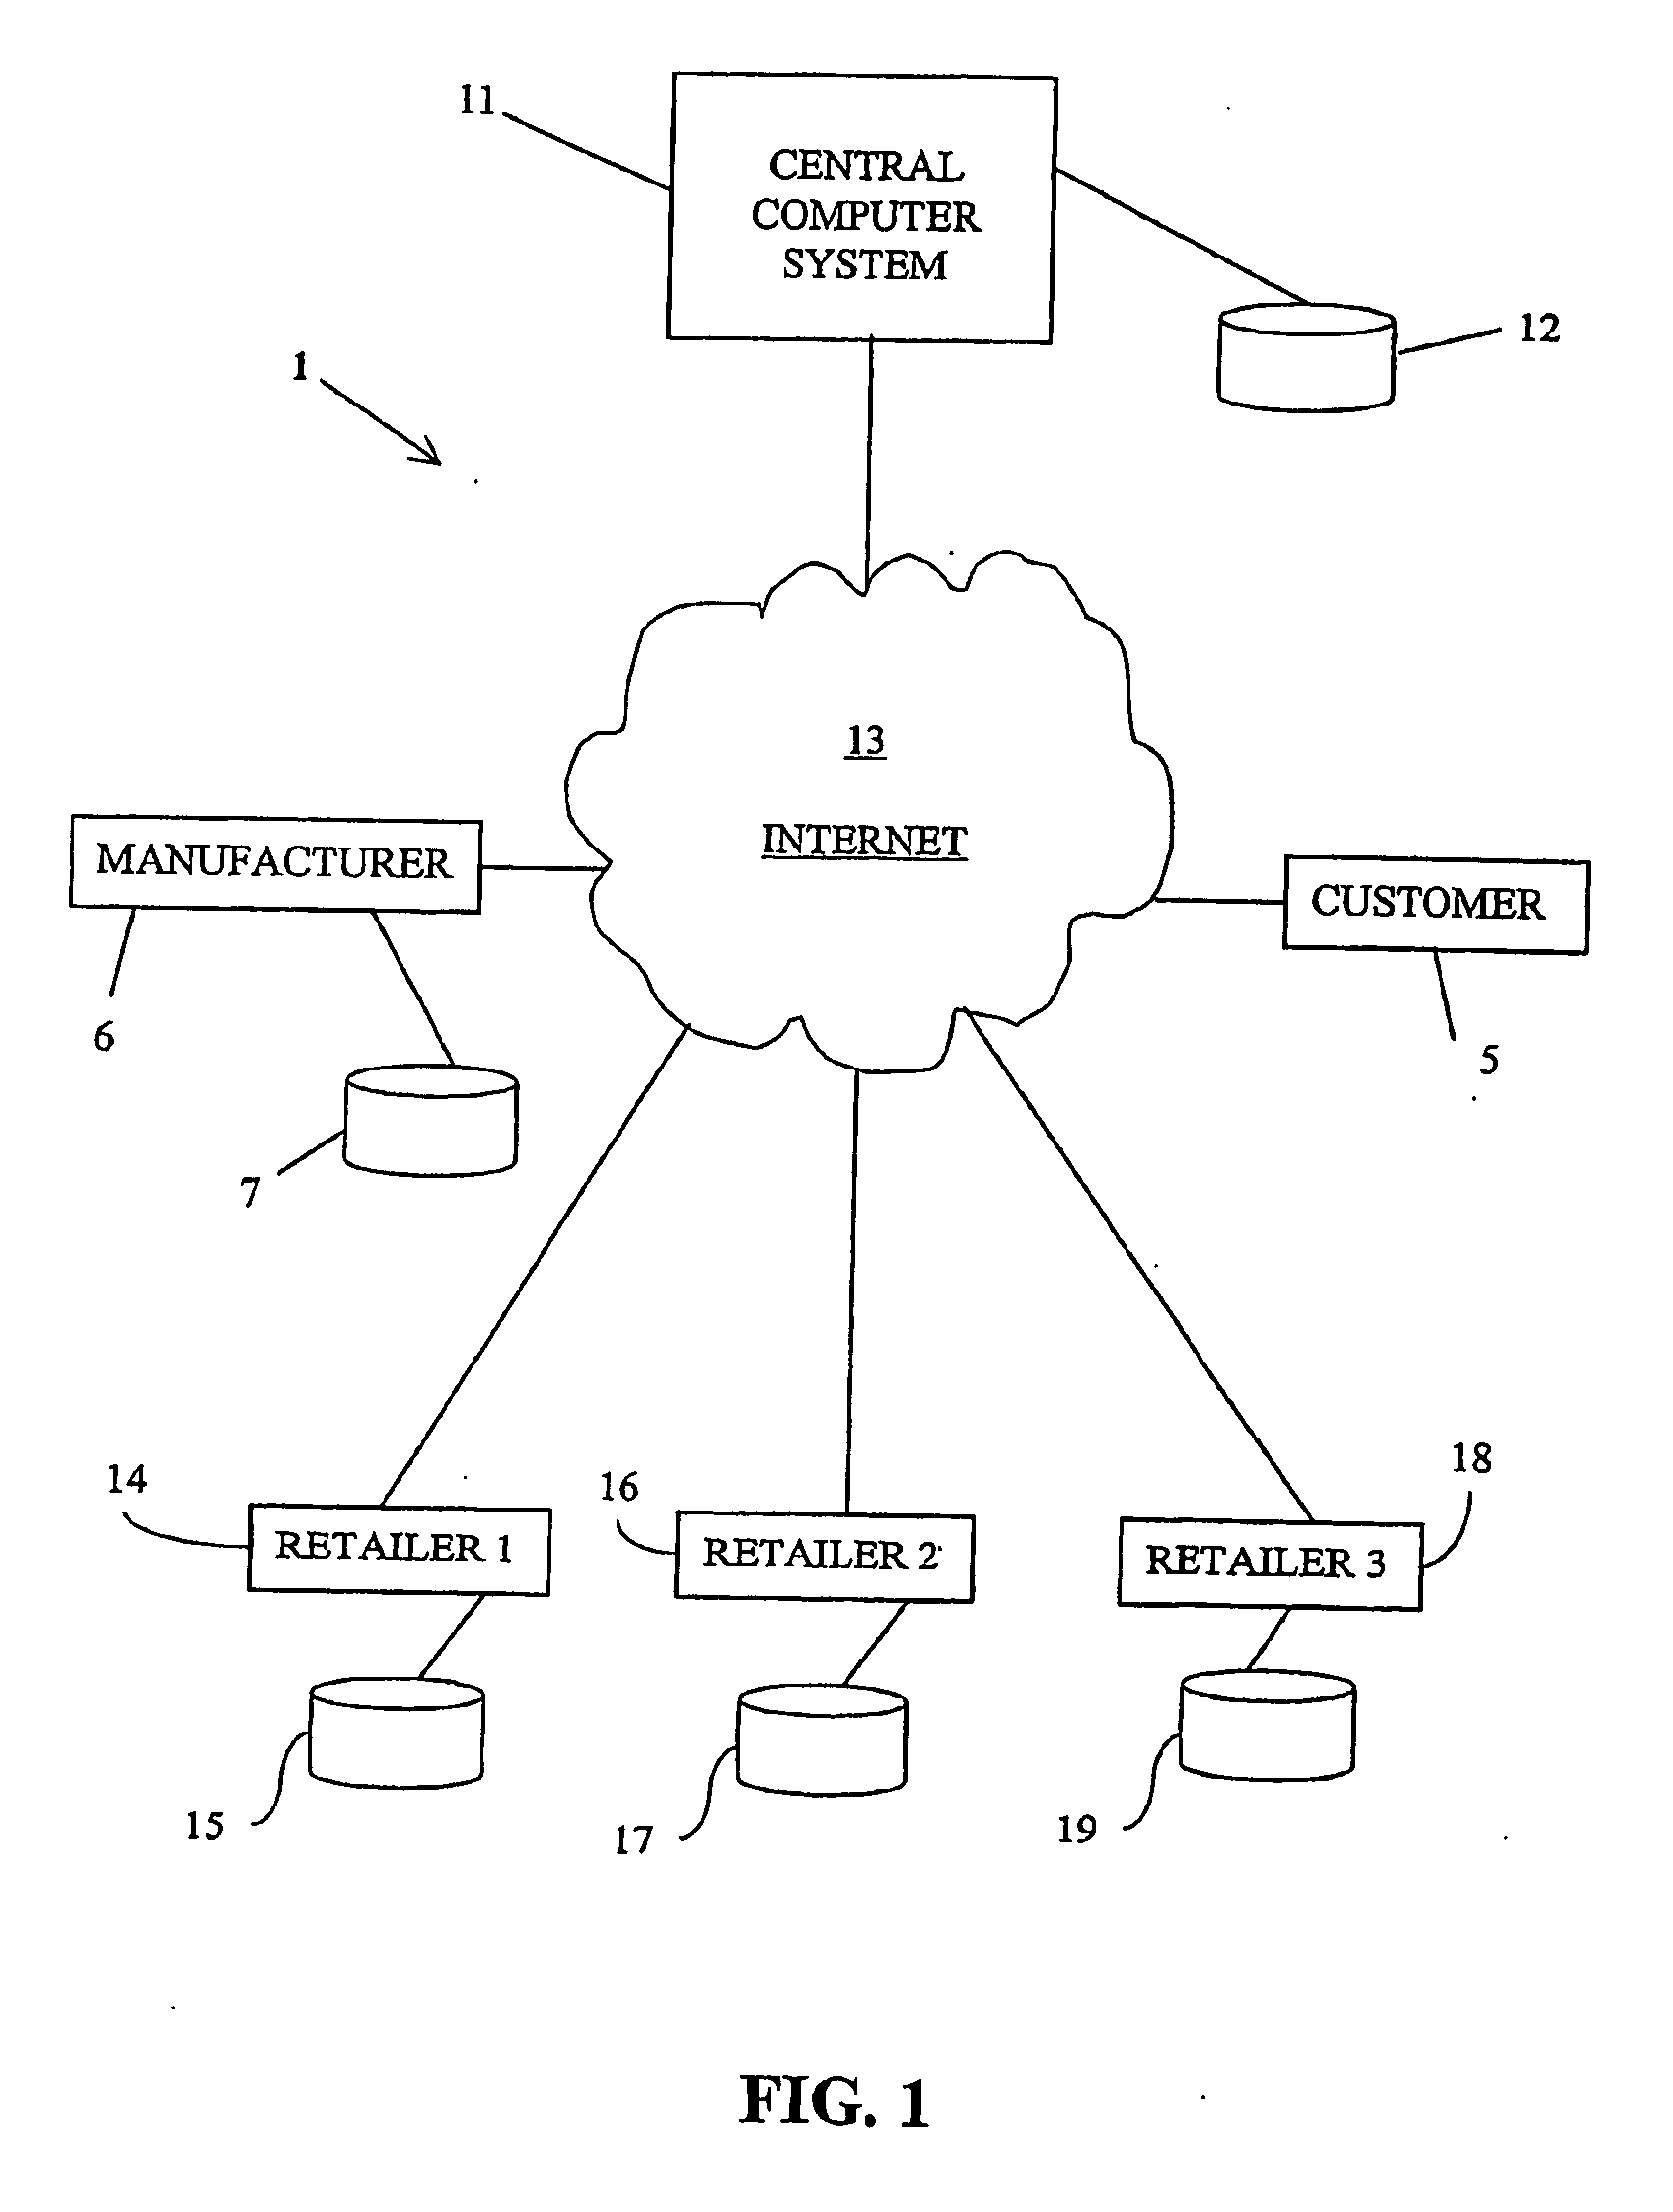 System and method for providing relative price point incentives based upon prior customer purchase behavior